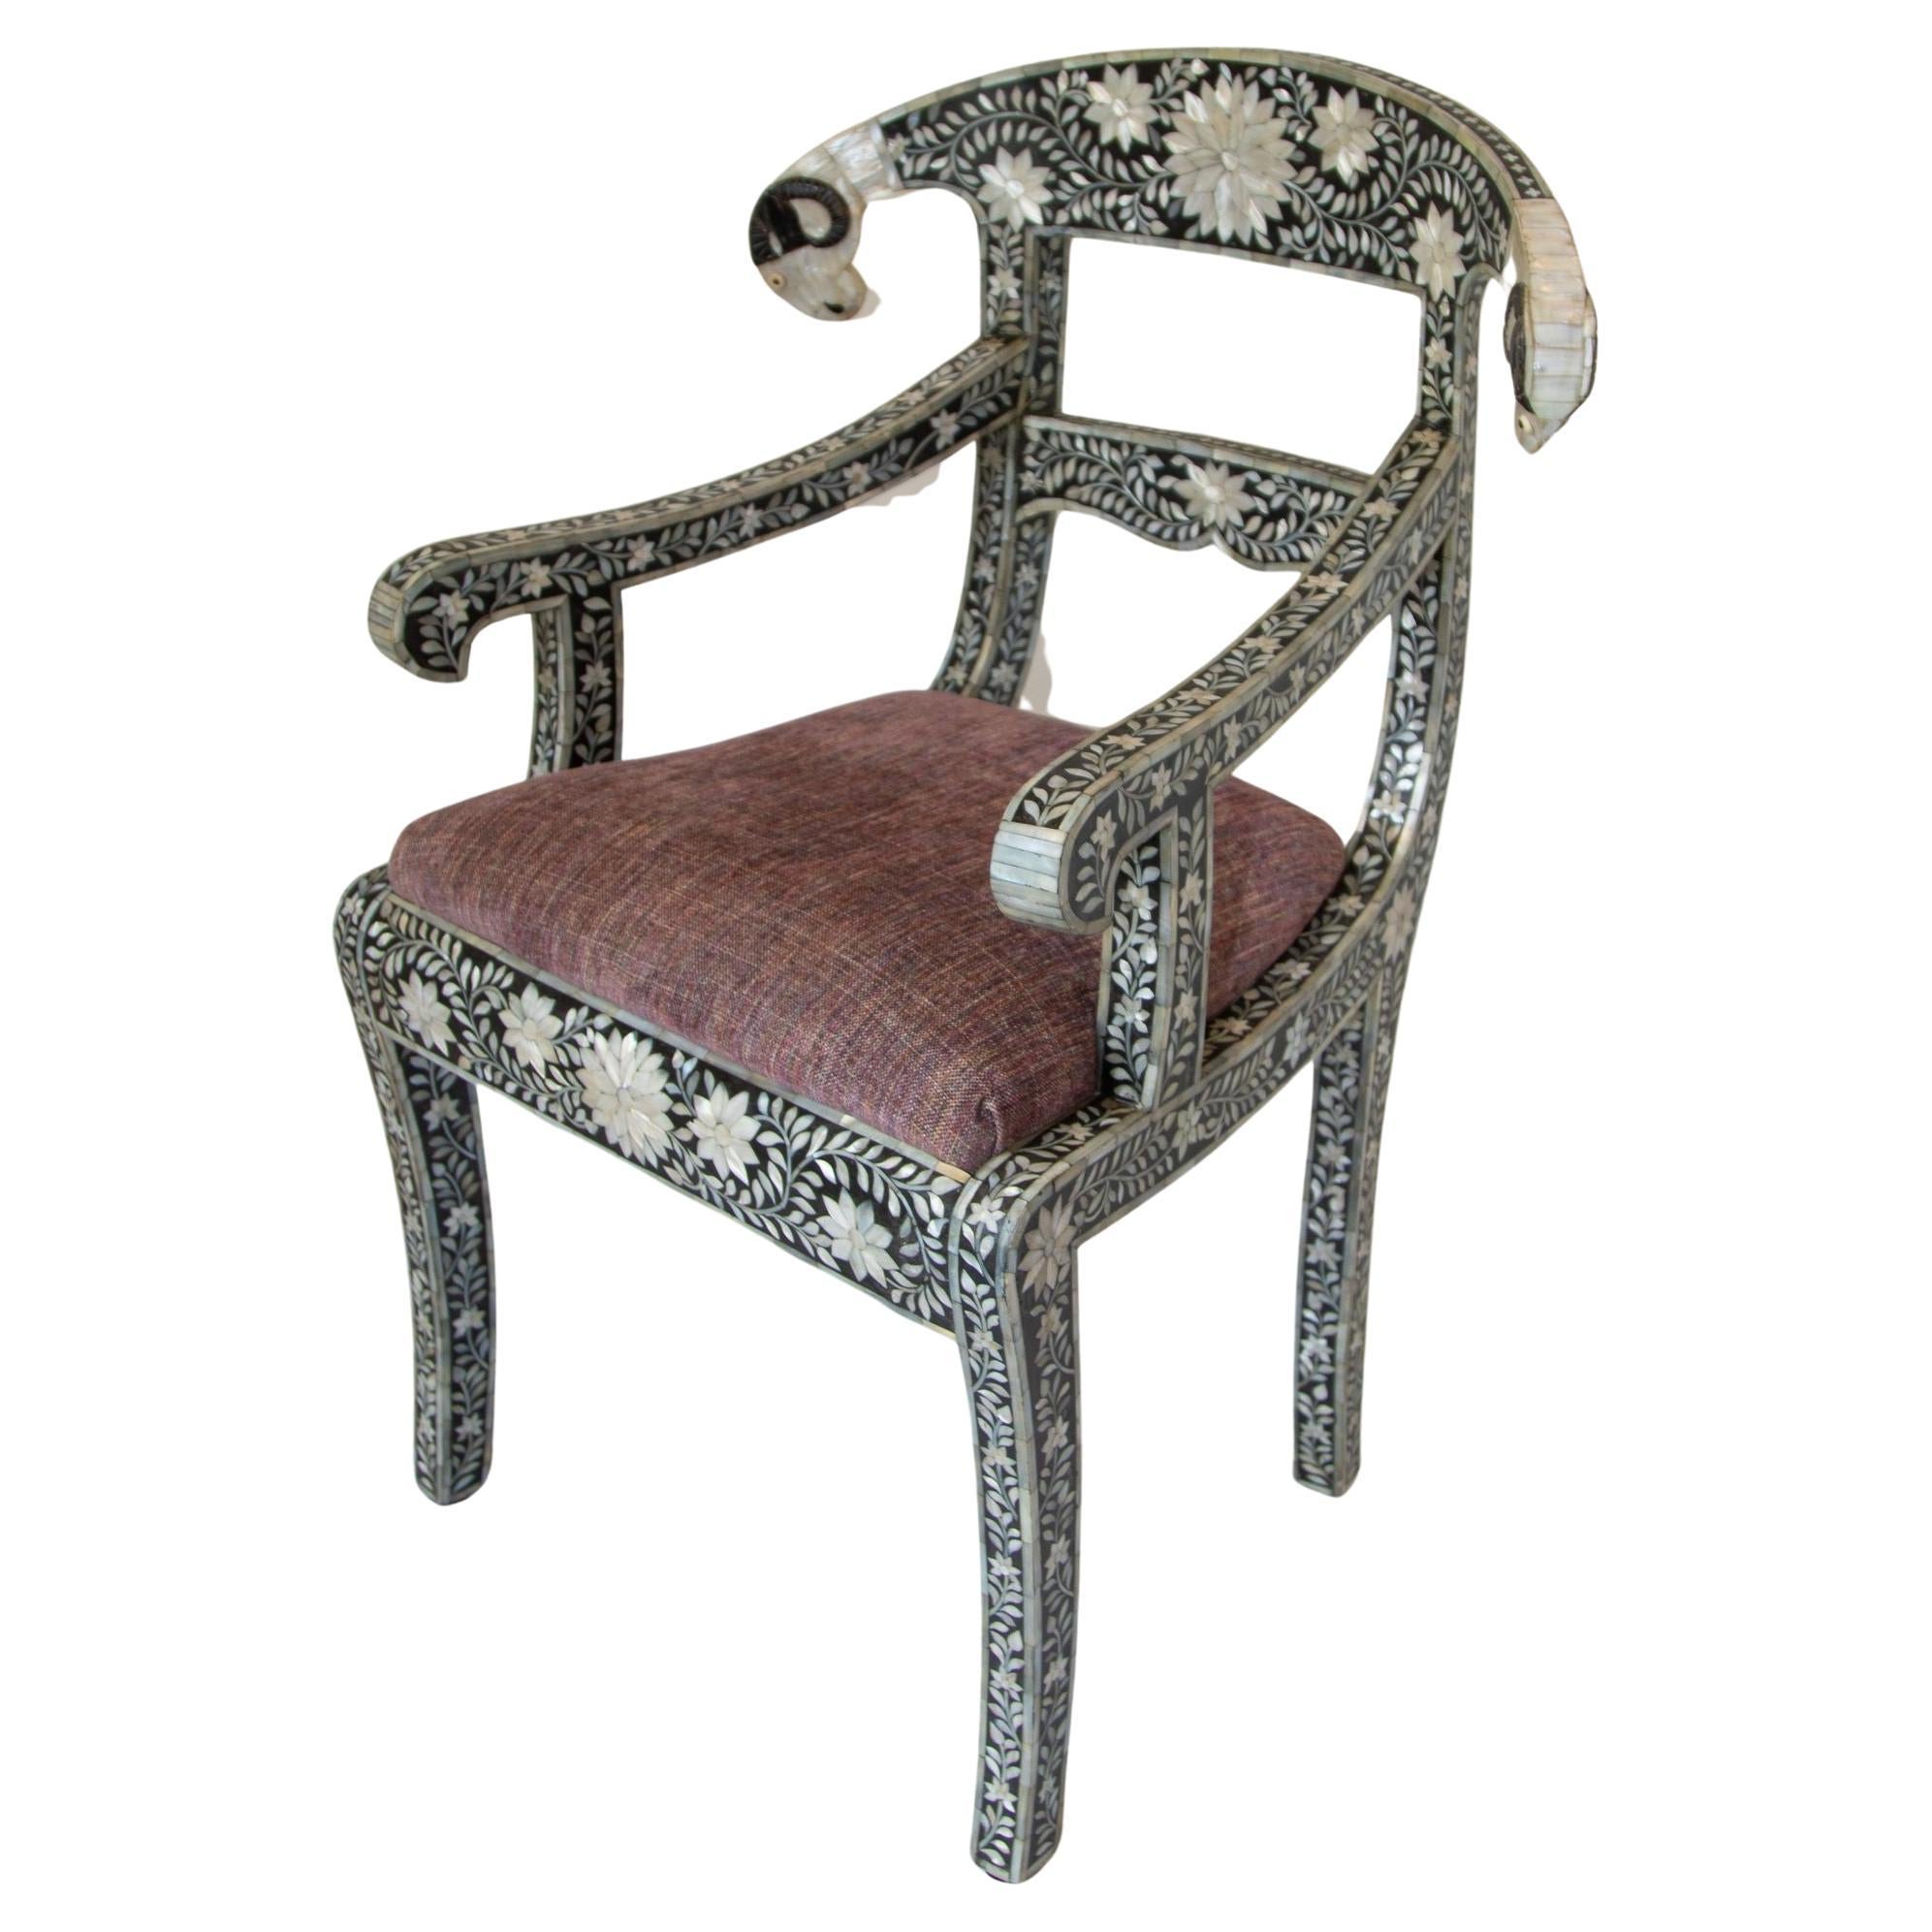 Anglo-Indian Mughal Mother of Pearl Inlaid Klismos Armchair with Ram Head